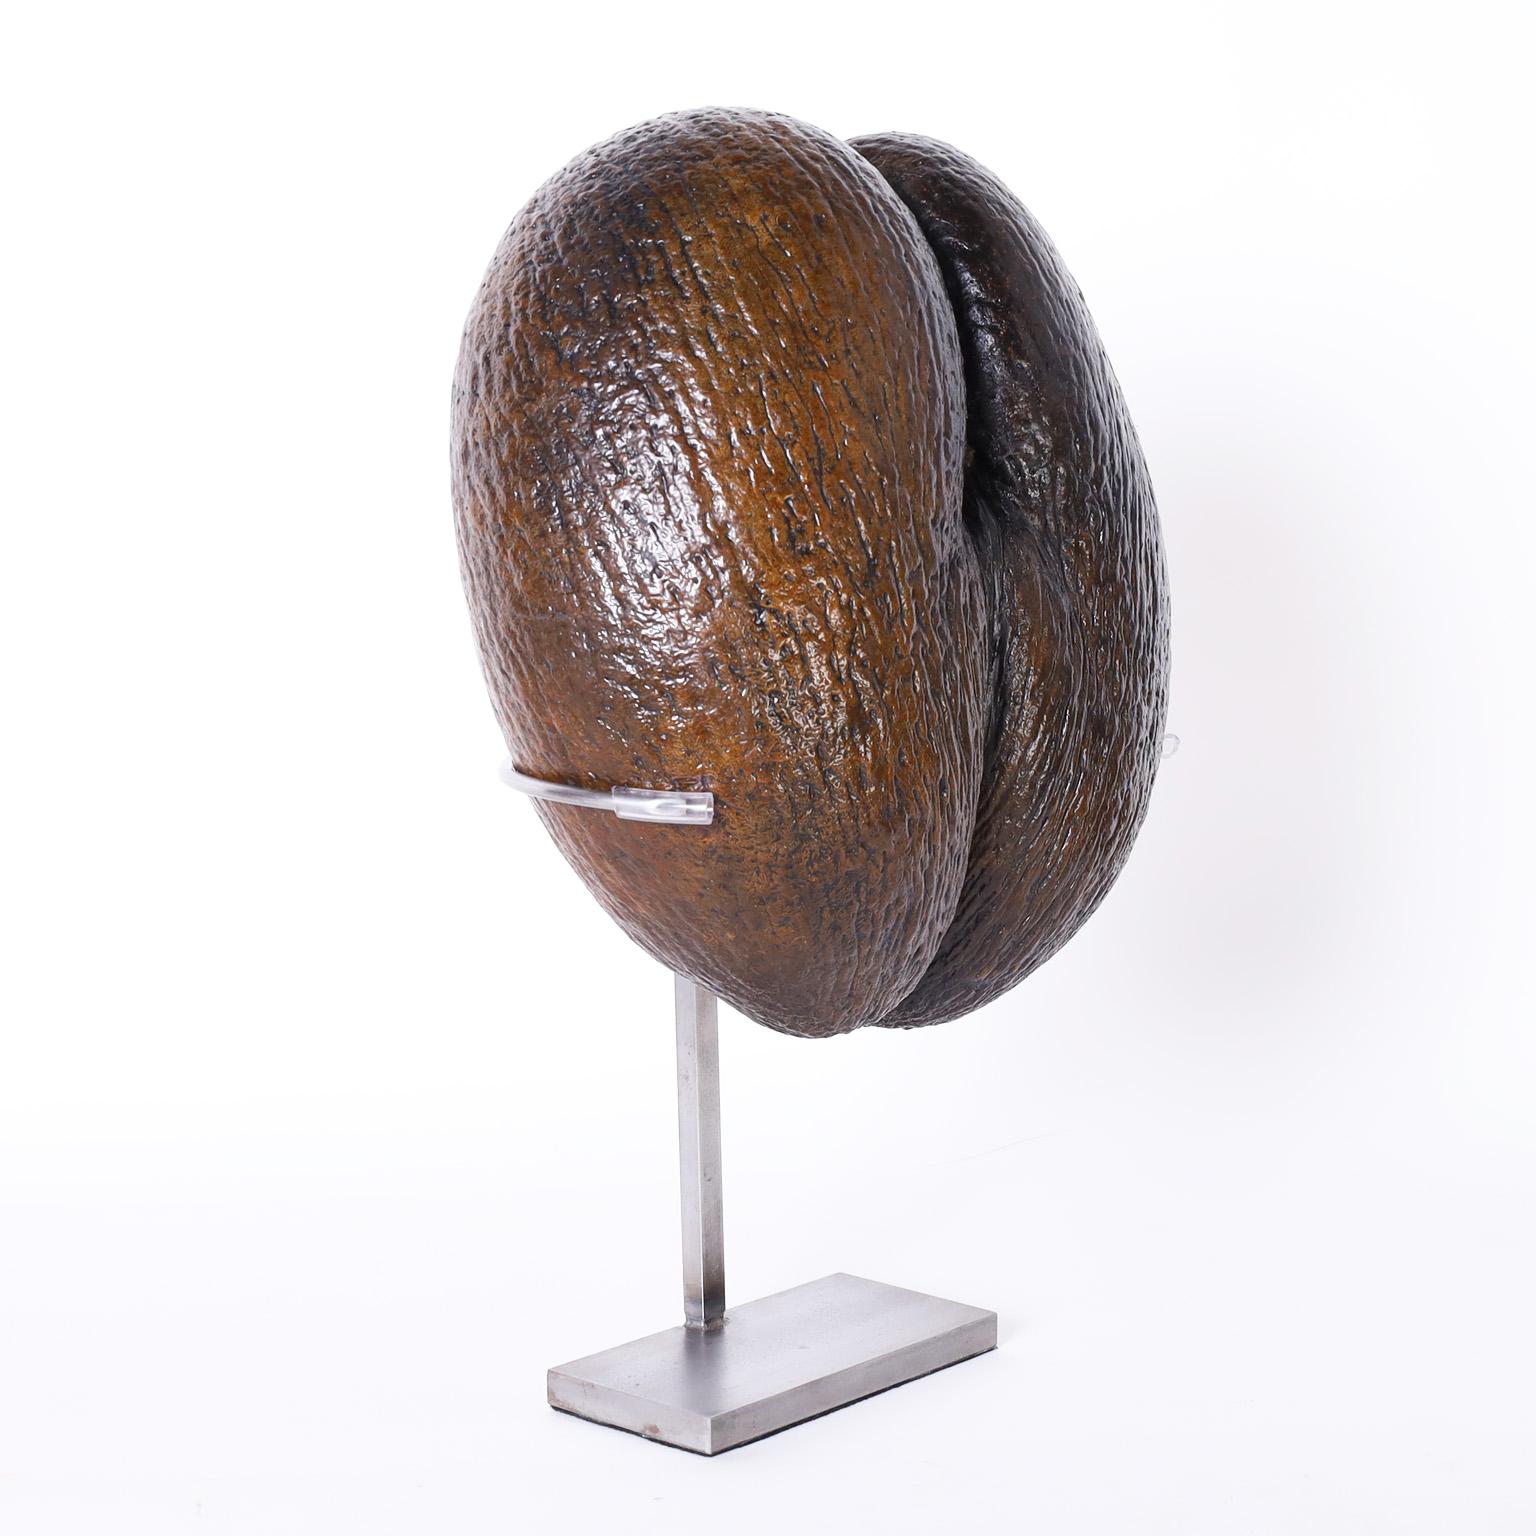 Coco de Mer on Stand - Other Art Style Sculpture by Unknown